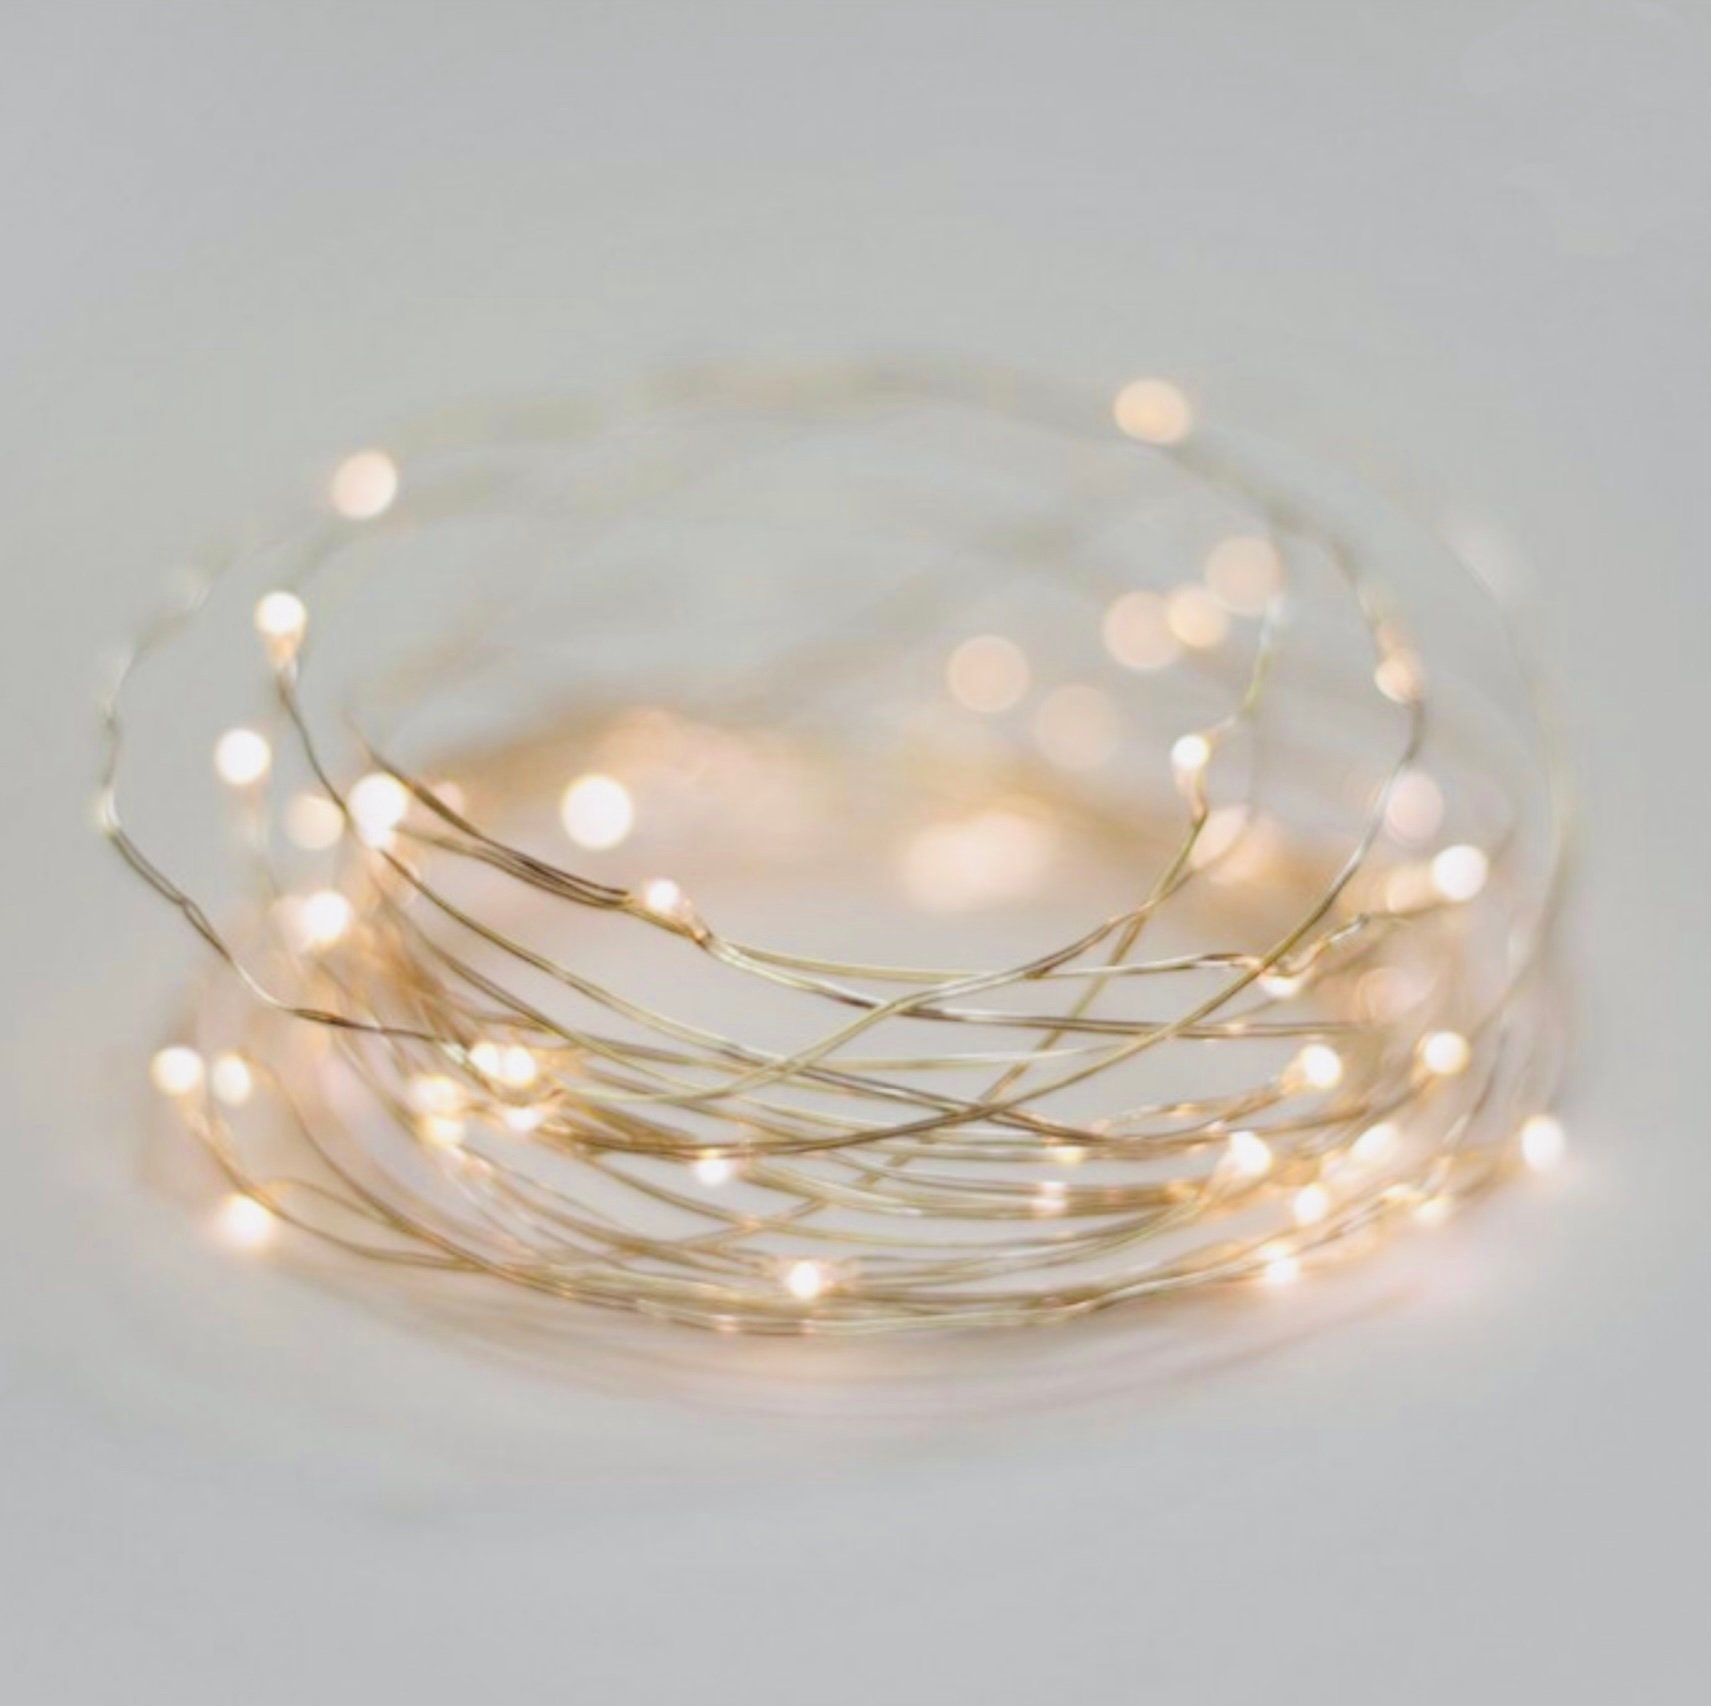 LEDGLE LED Copper Wire String Lights 10 Pack 3.9ft/1.2m 24 LED Warm White Fairy Lights Battery Operated Waterproof for DIY Party Wedding Costume Table Decorations 